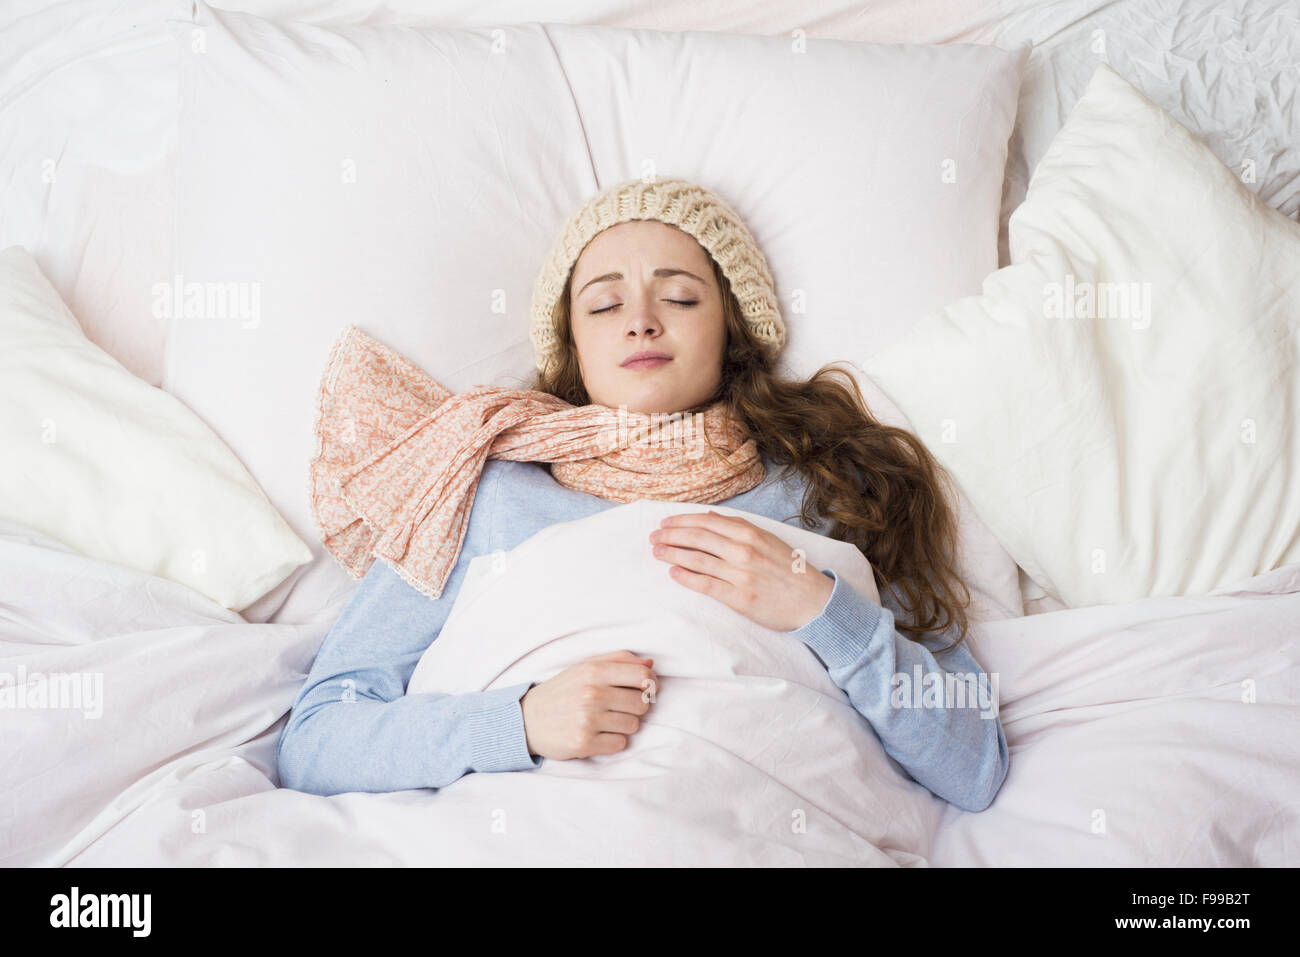 Sick woman lying in bed with high fever. She has cold and flu. Stock Photo